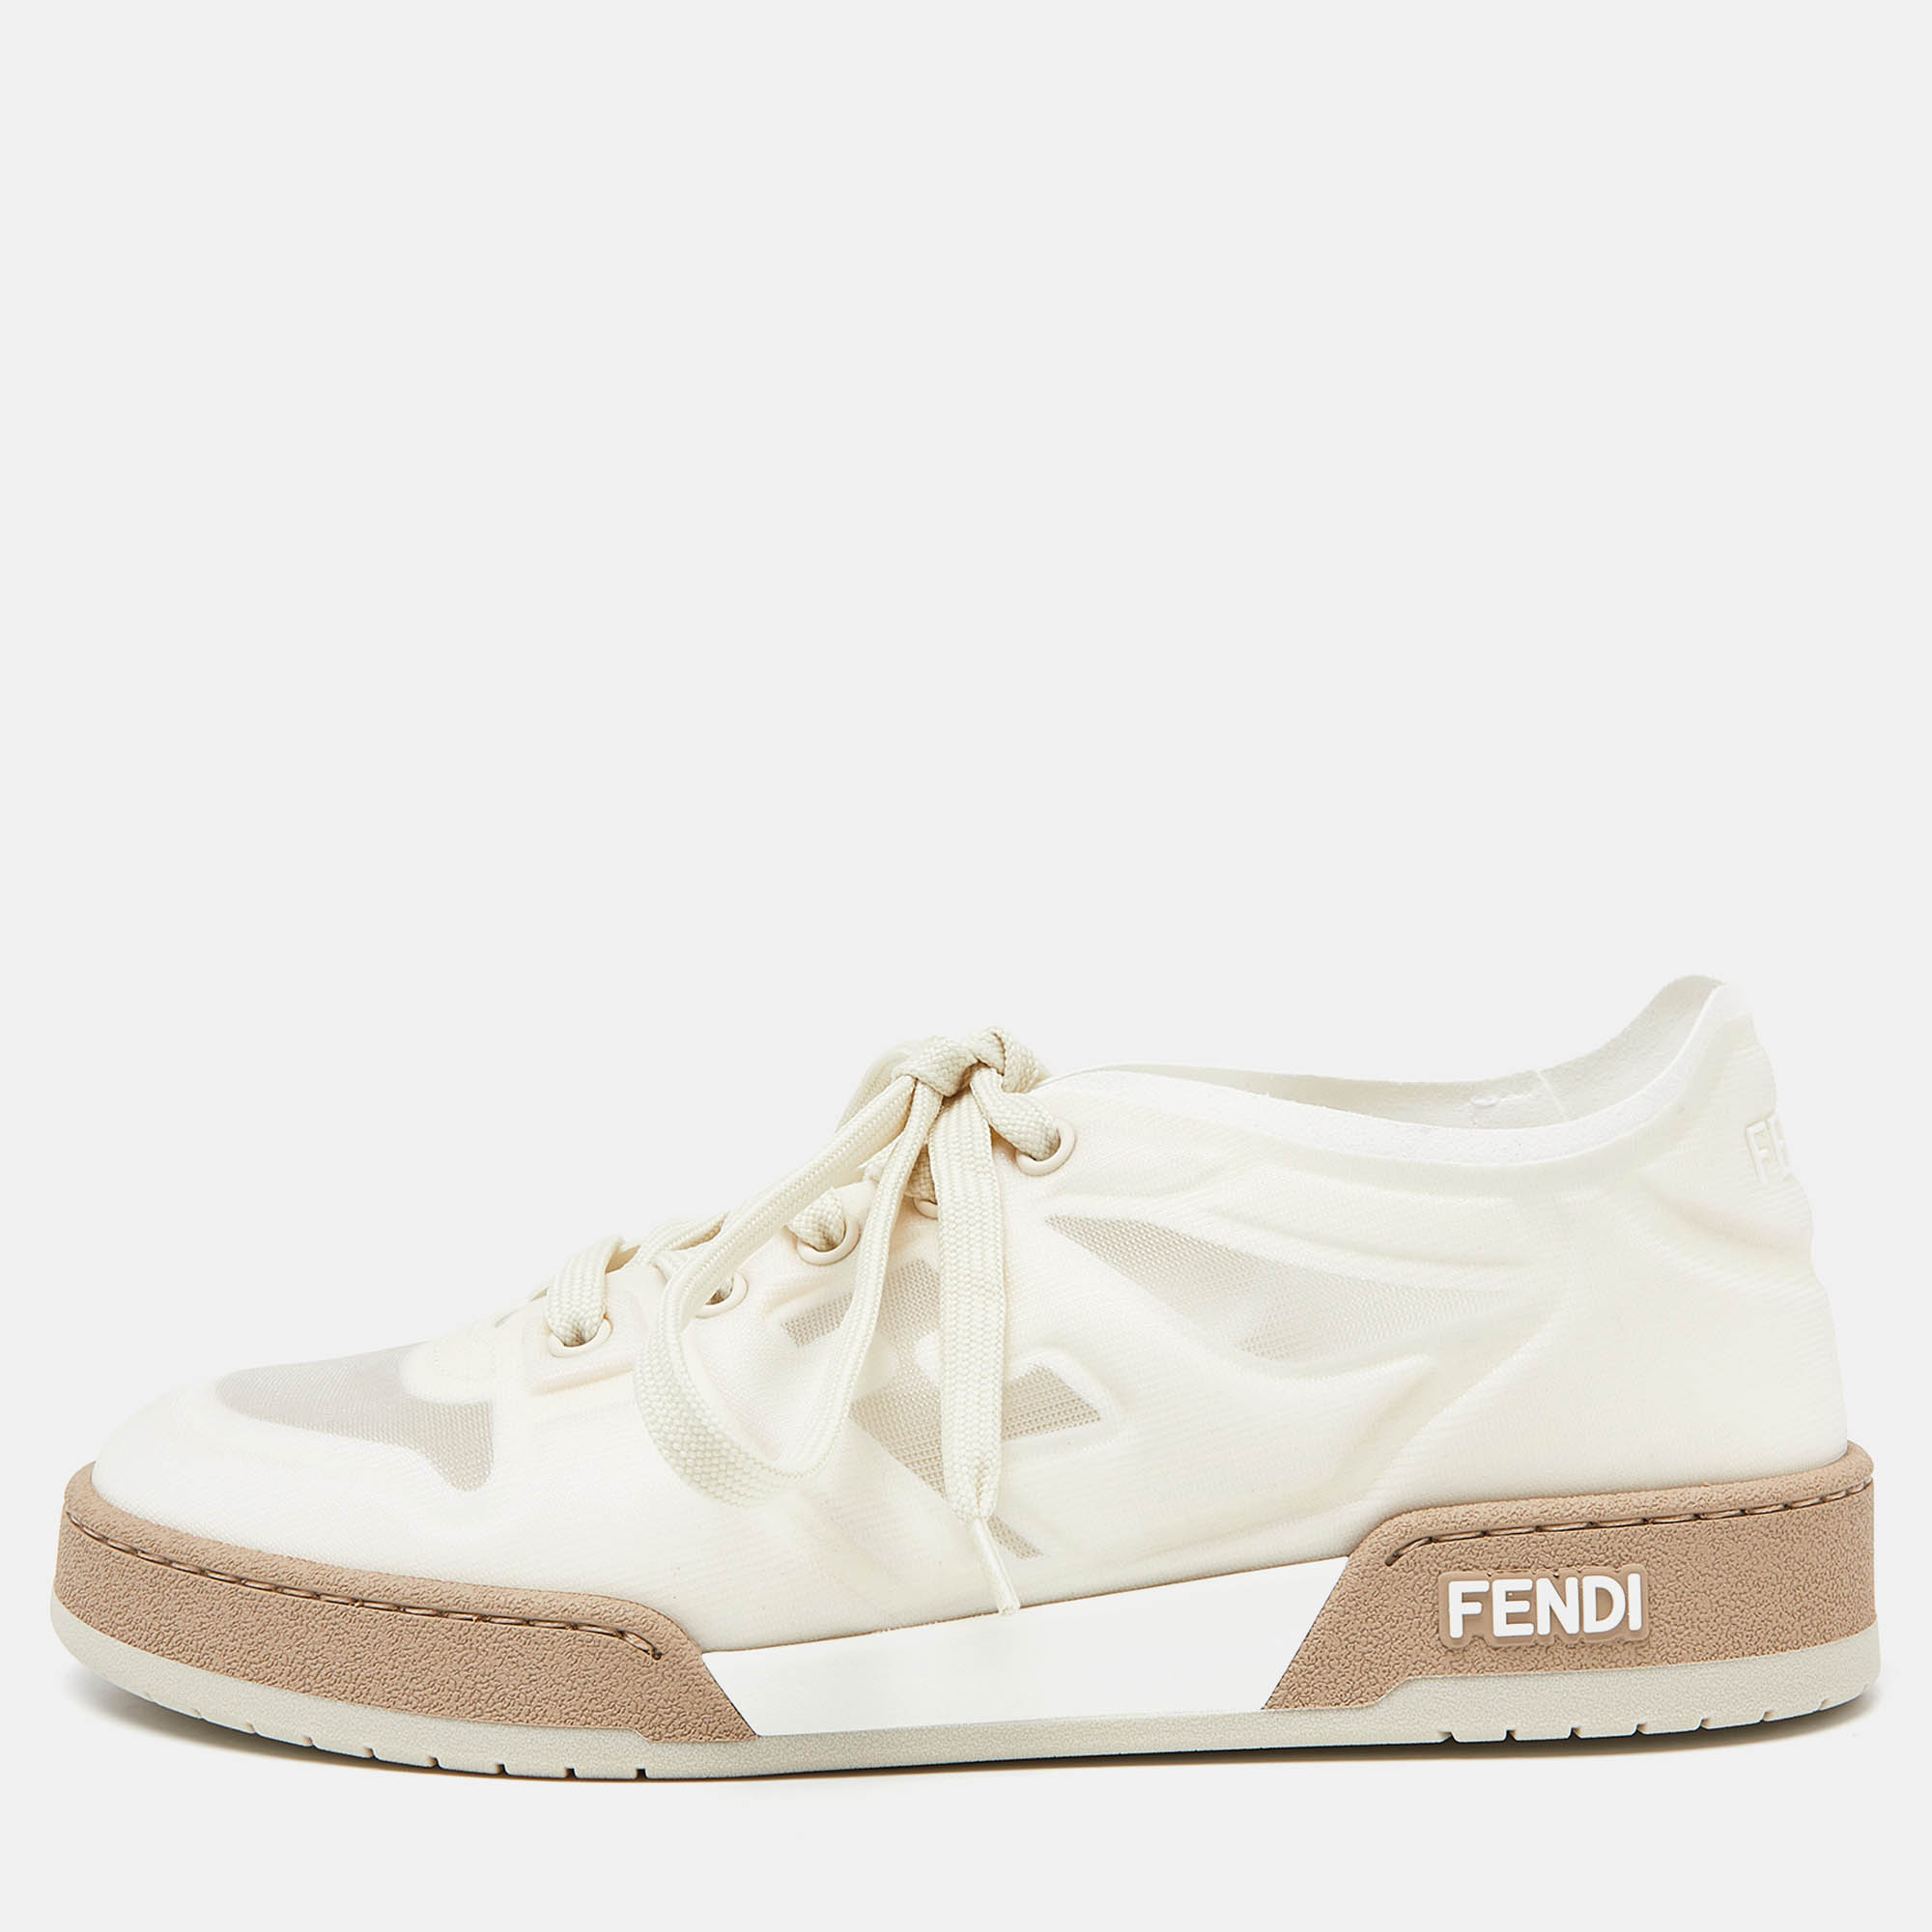 Pre-owned Fendi White/cream Mesh Match Low Top Sneakers Size 39